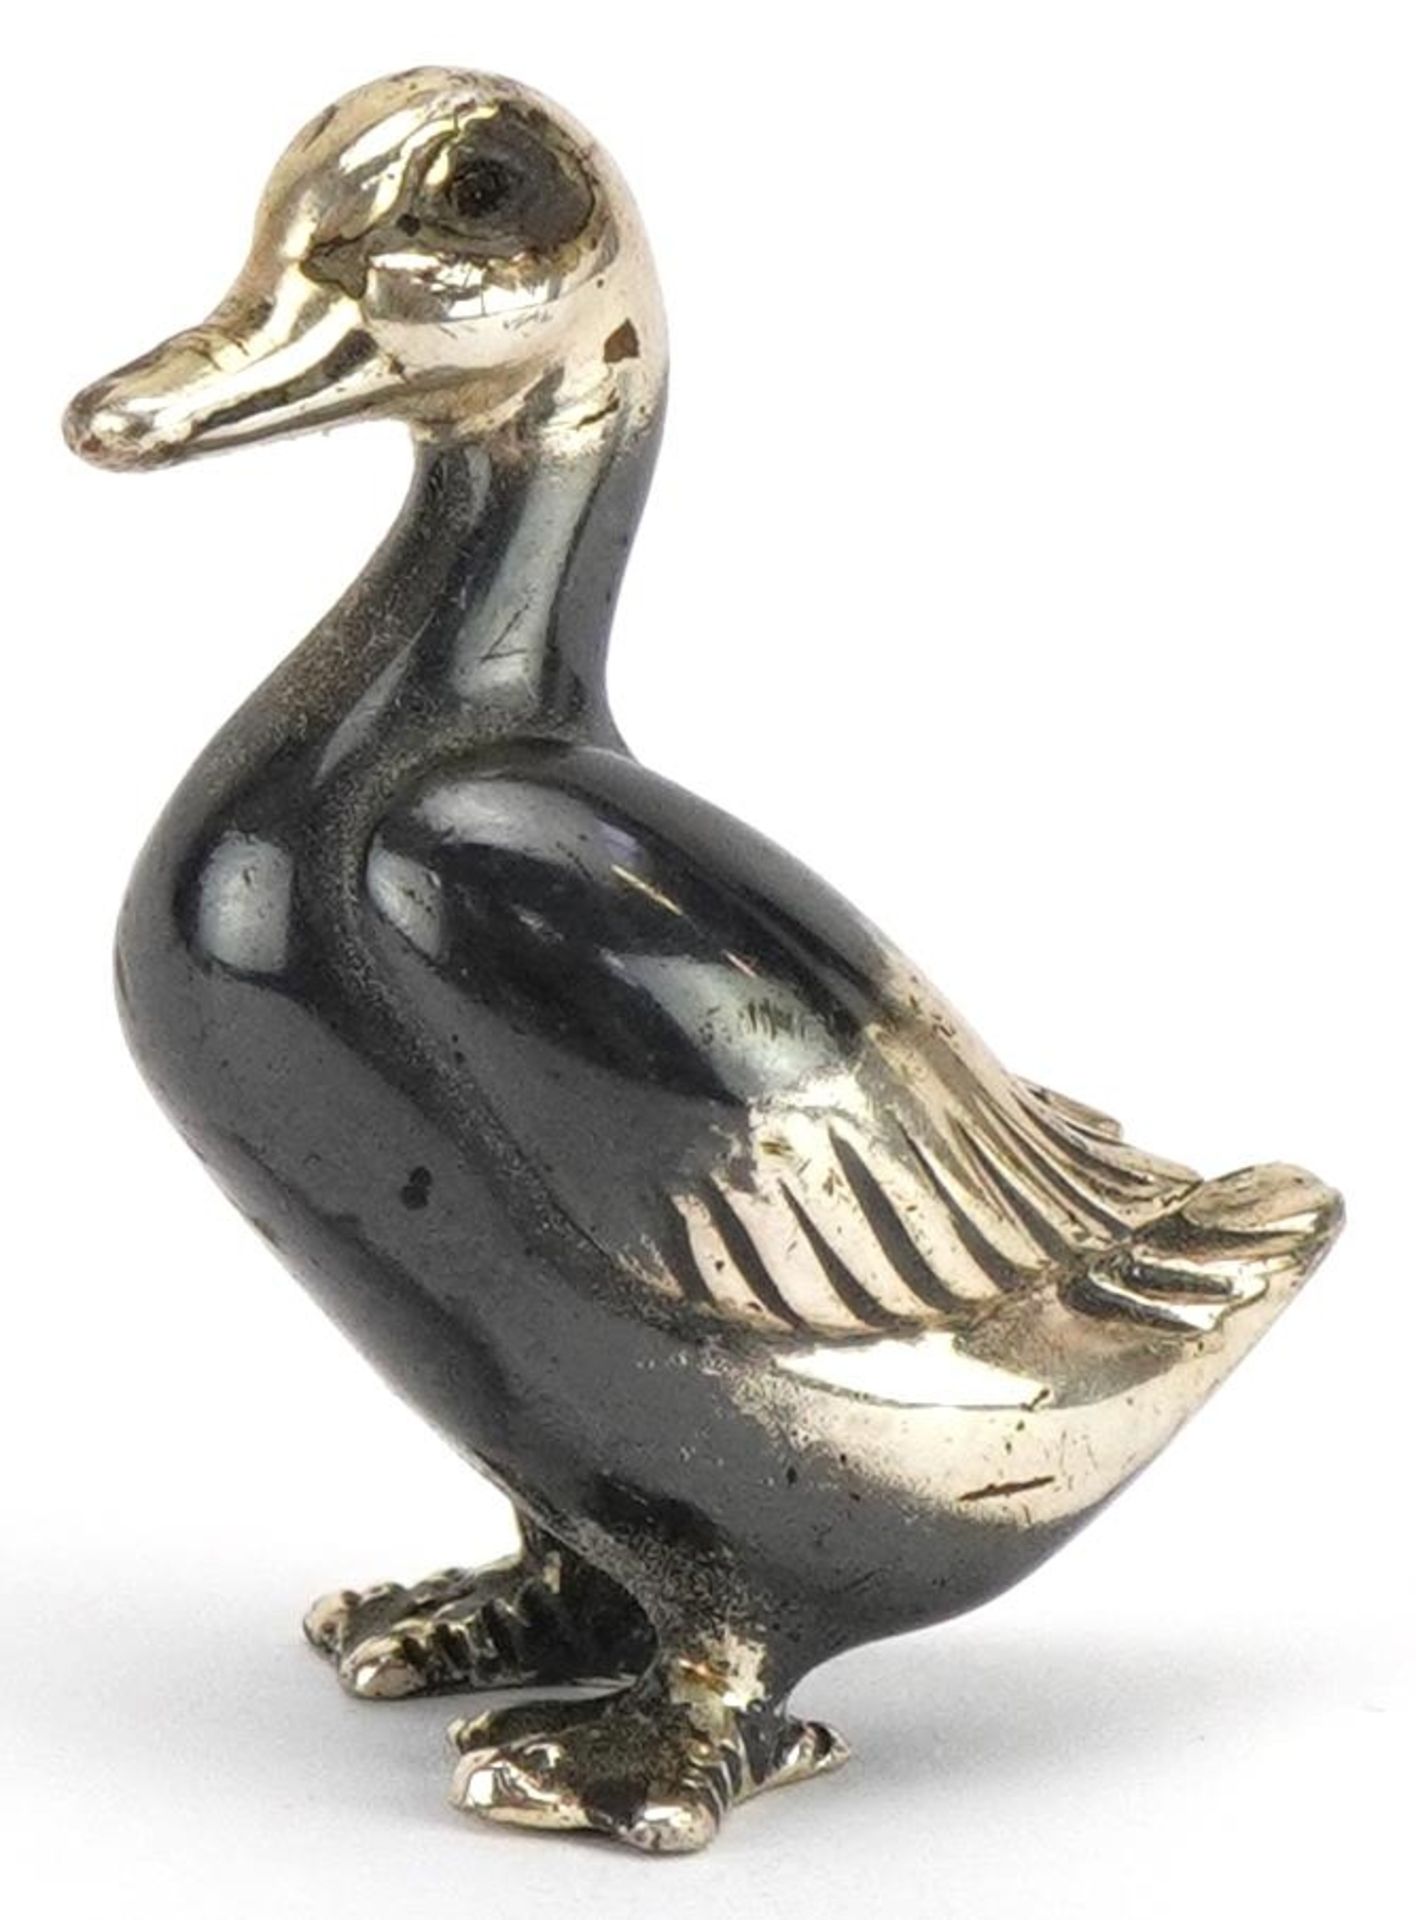 Miniature continental 800 grade silver duck, 3cm high, 8.4g : For further information on this lot